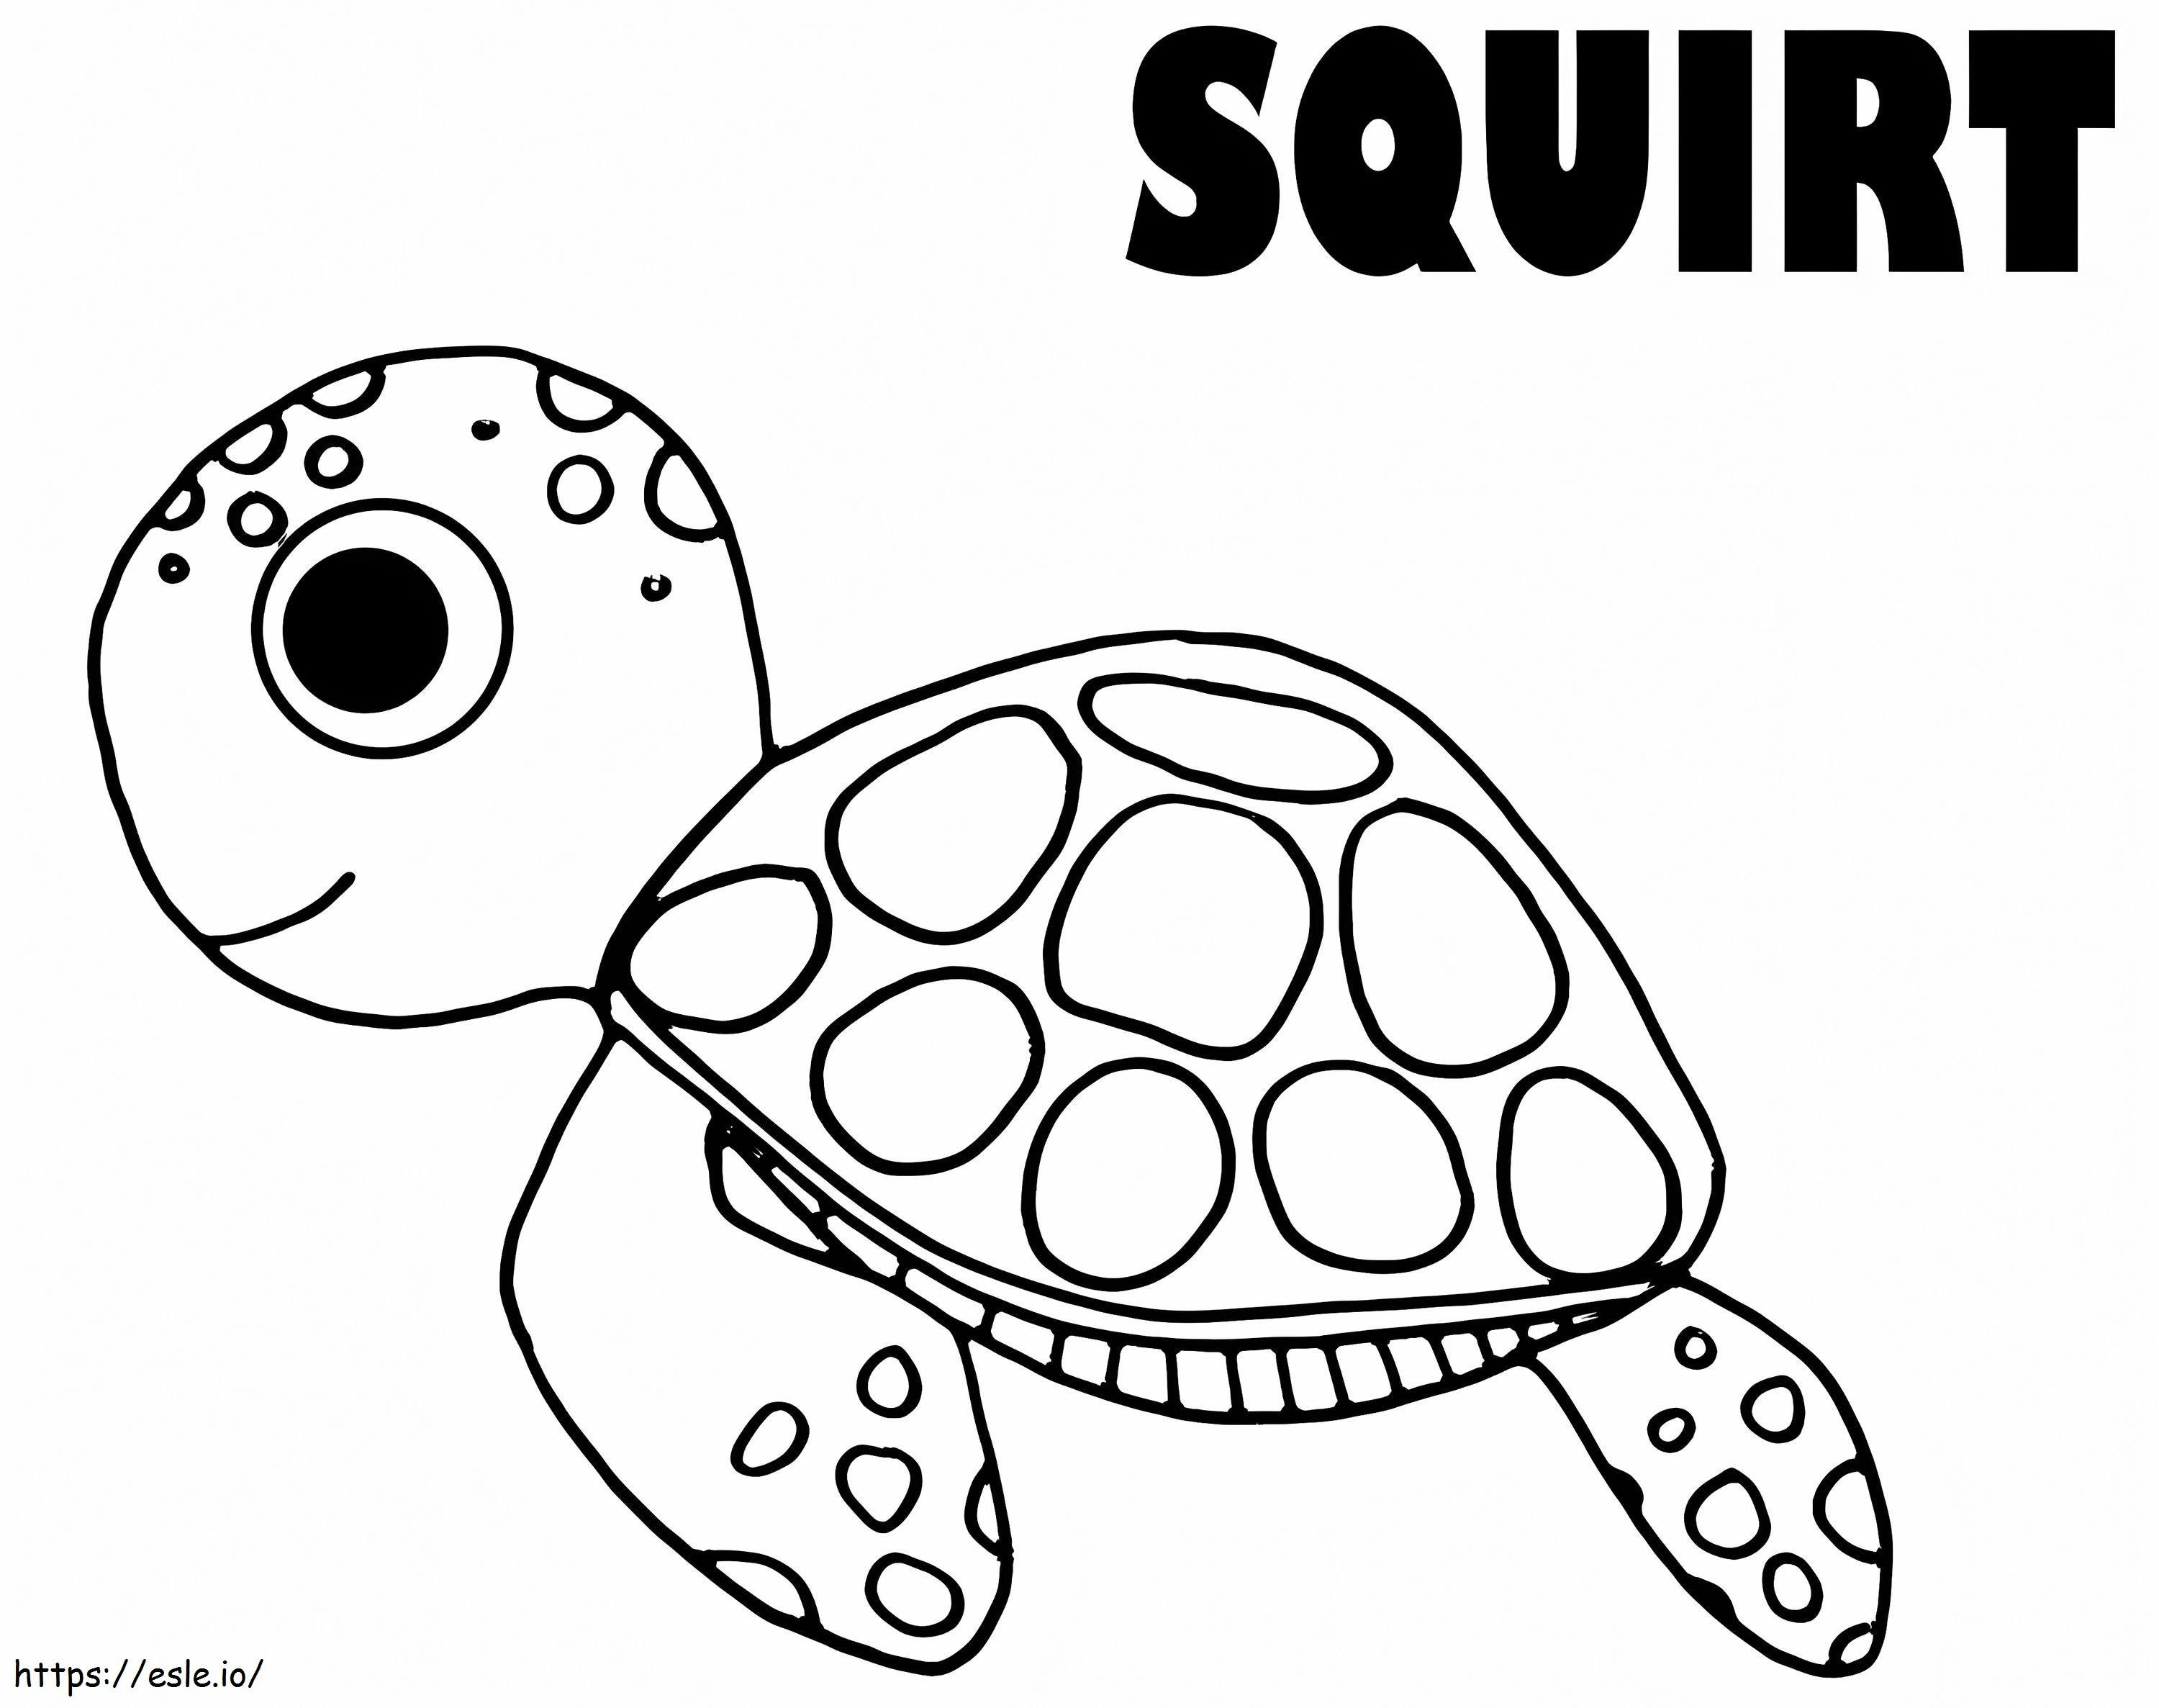 Printable Squirt coloring page